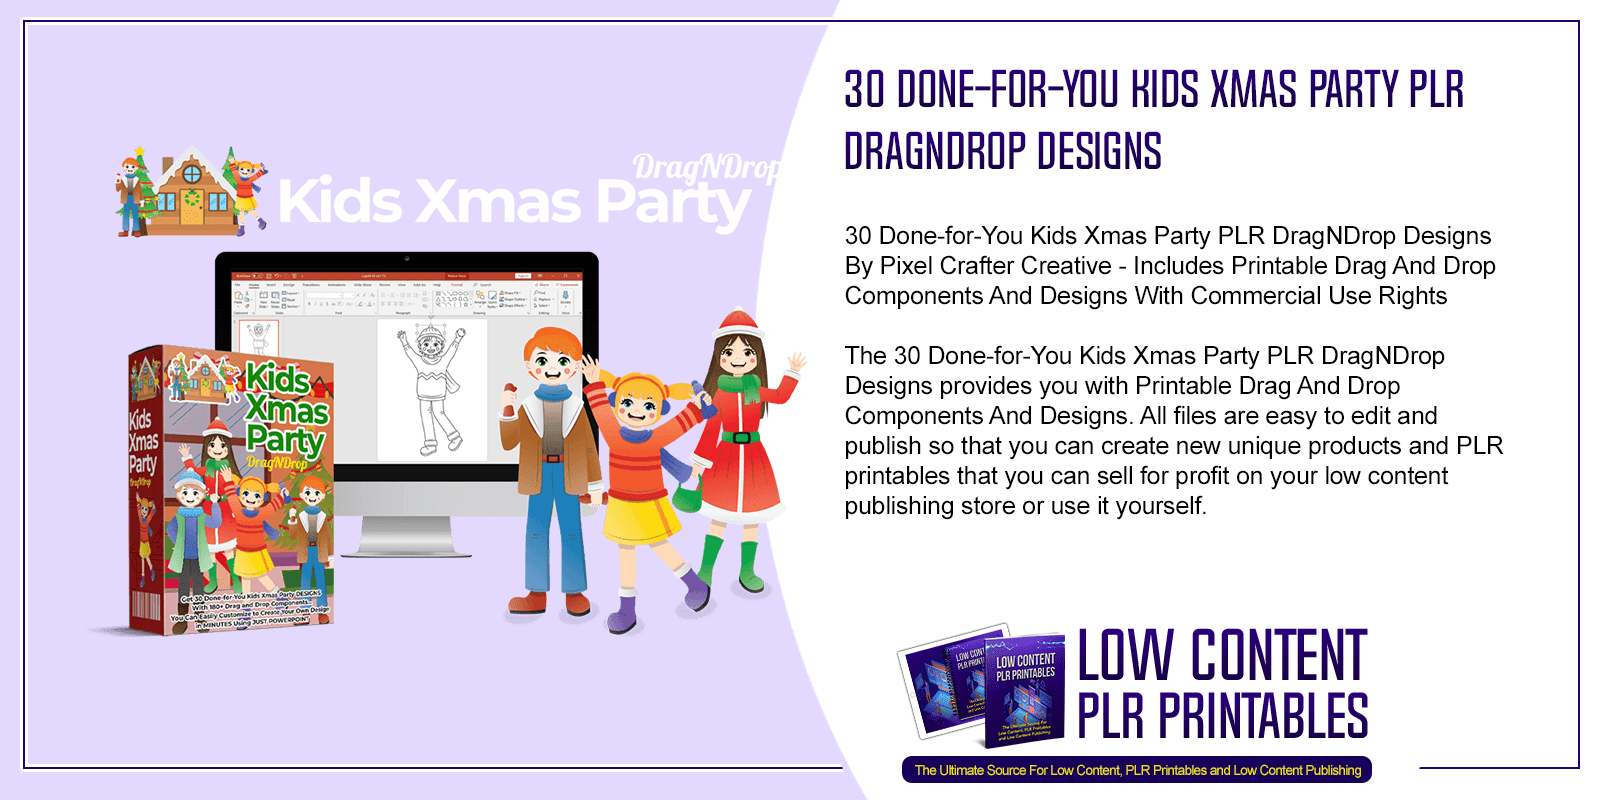 30 Done for You Kids Xmas Party PLR DragNDrop Designs